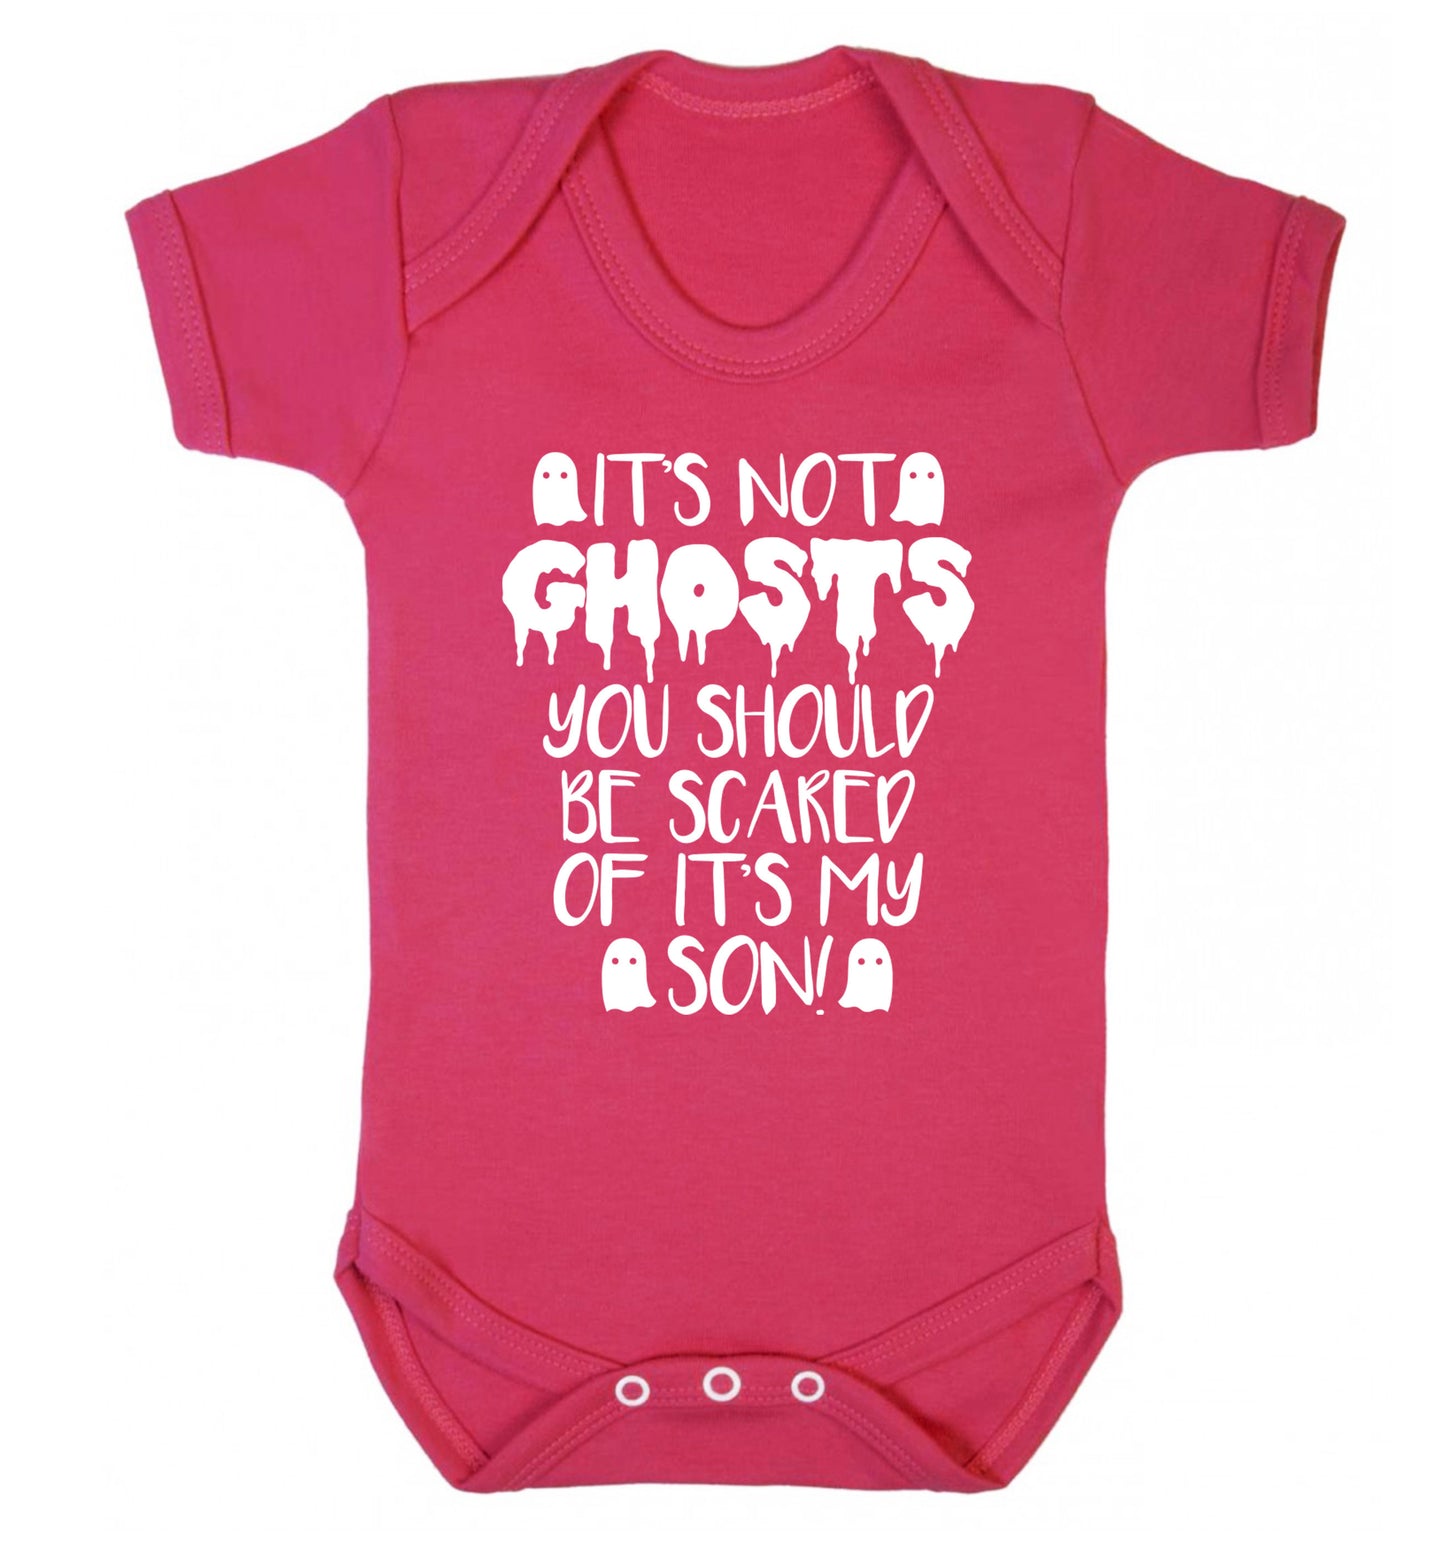 It's not ghosts you should be scared of it's my son! Baby Vest dark pink 18-24 months